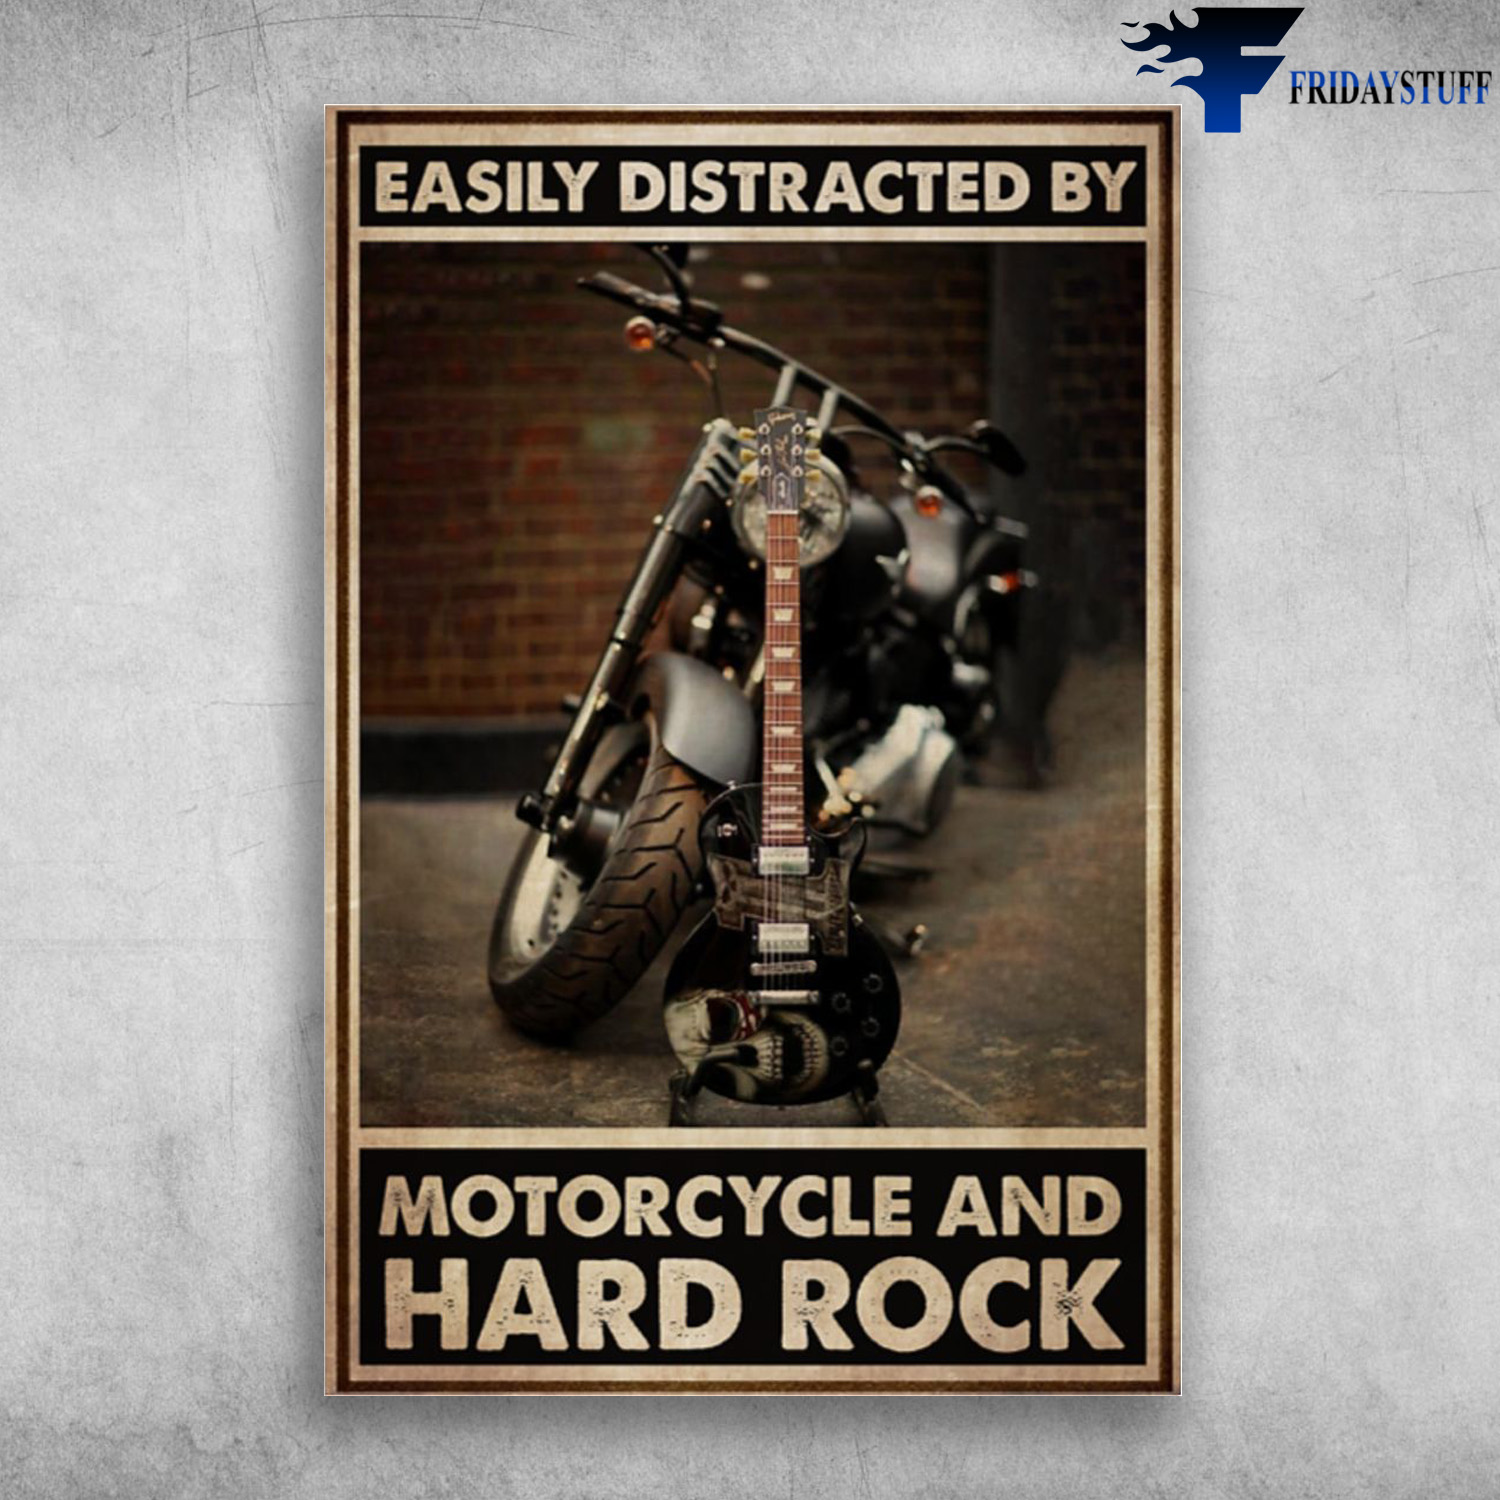 Motorcycle And Hard Rock - Easily Distracted By Motorcycle And Hard Rock